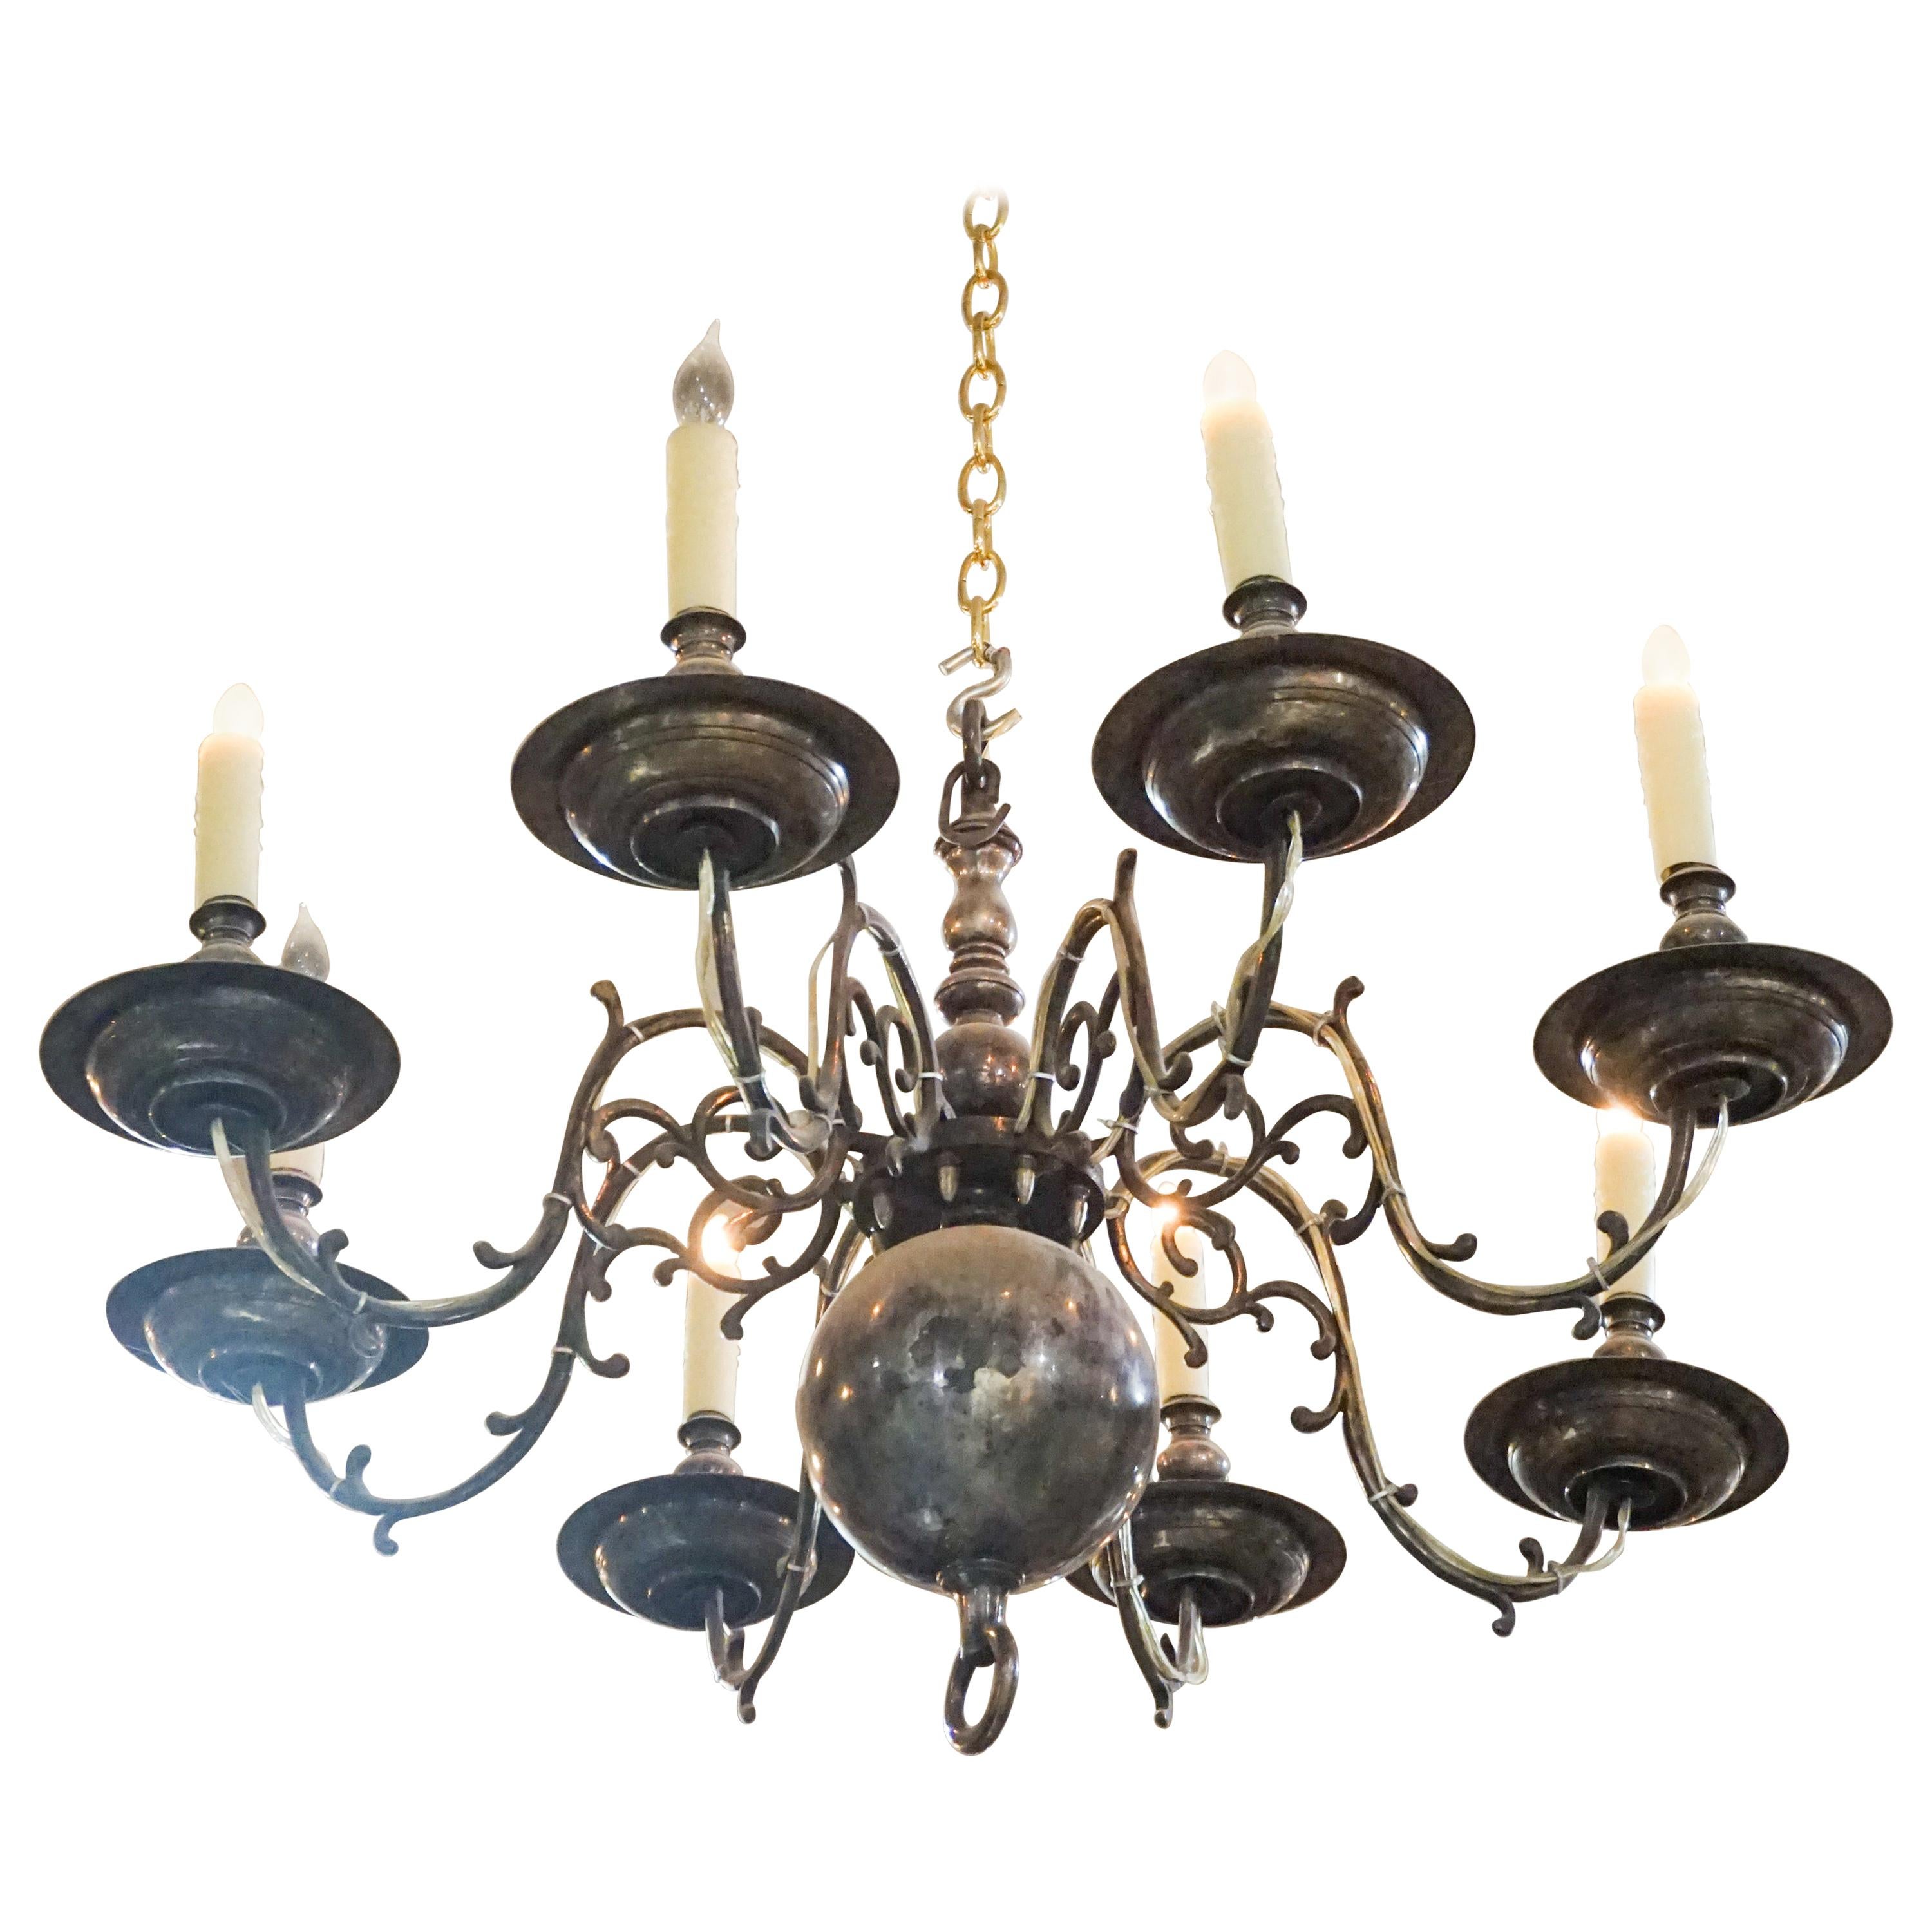 Arm Silver Plated Chandelier, circa 1920